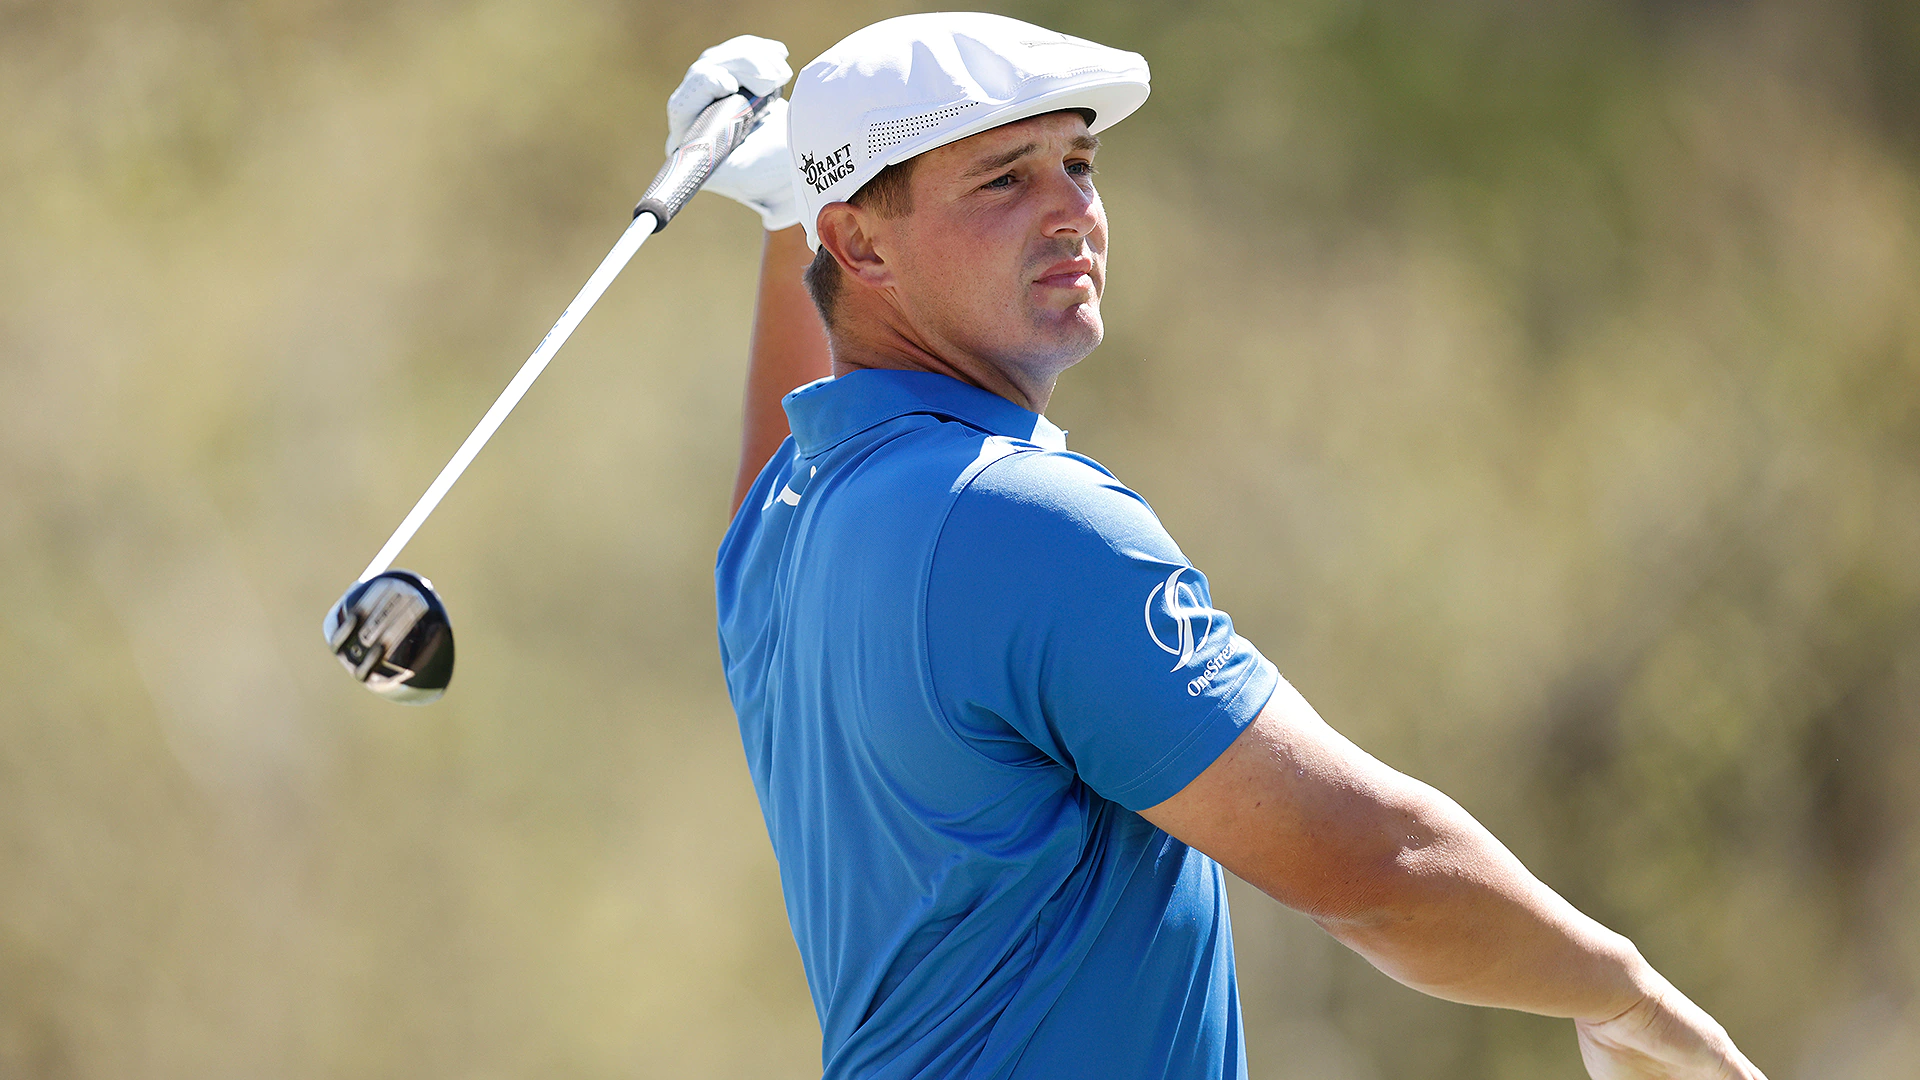 Bryson DeChambeau explains his ‘heel-pulled’ 46-yard drive on Day 2 in Austin